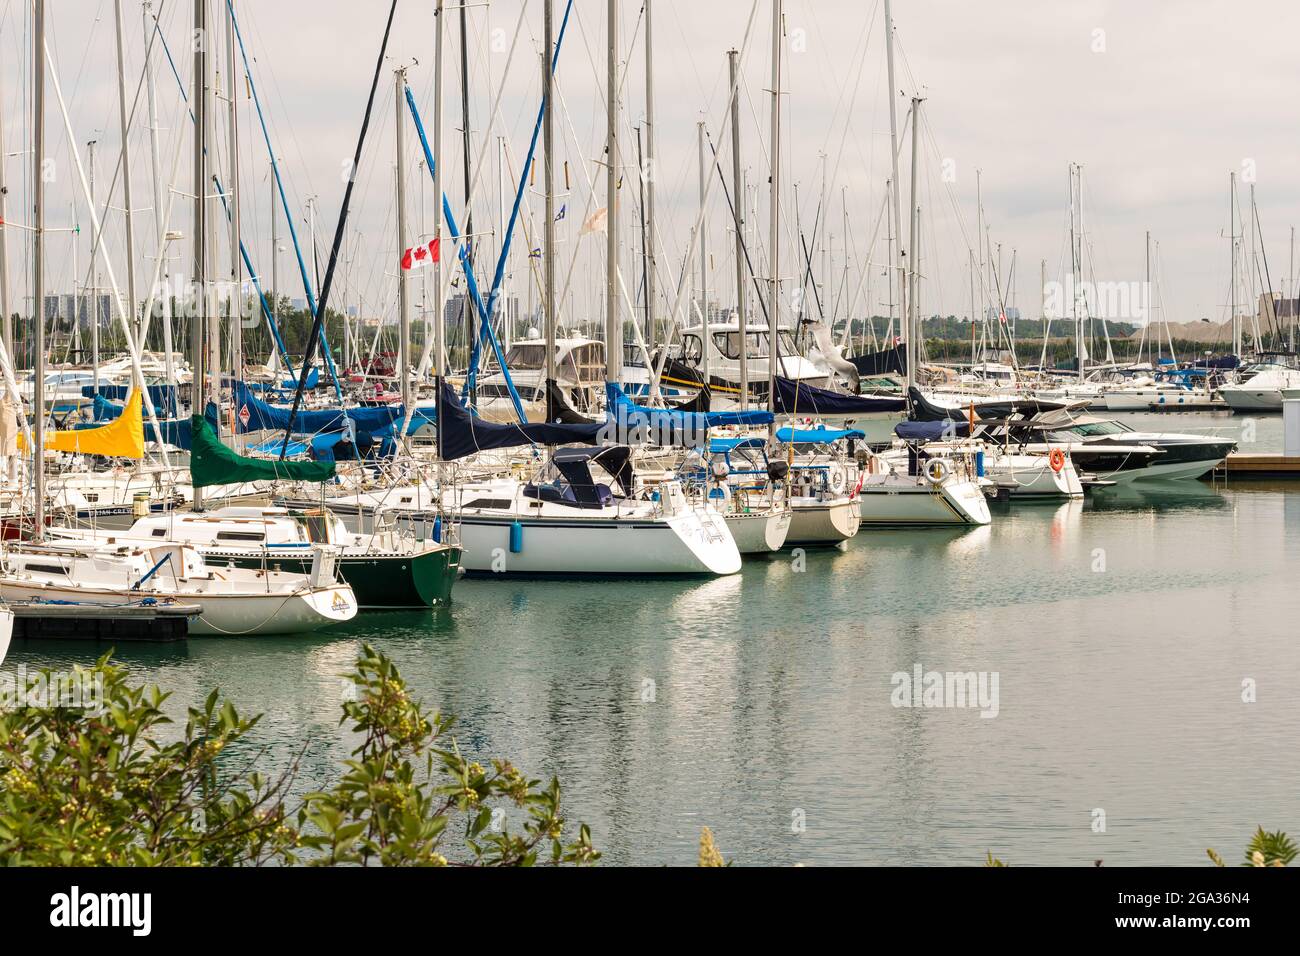 Mississauga, Ontario, Canada - July 4 2021: Sailboats docked in the Lakefront Promenade marina. Canadian flag on one of the boat's masts. Stock Photo